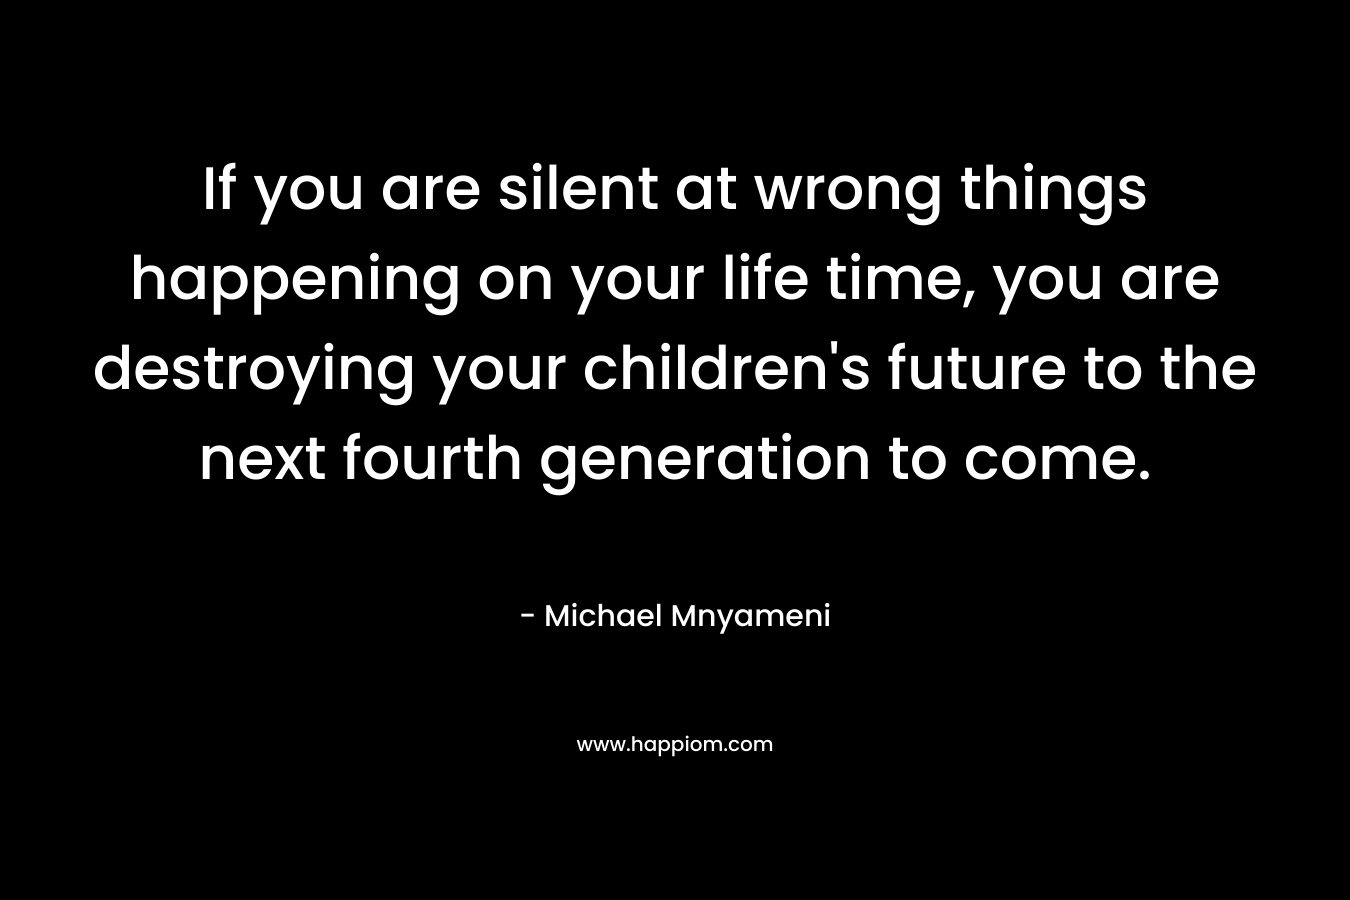 If you are silent at wrong things happening on your life time, you are destroying your children's future to the next fourth generation to come.